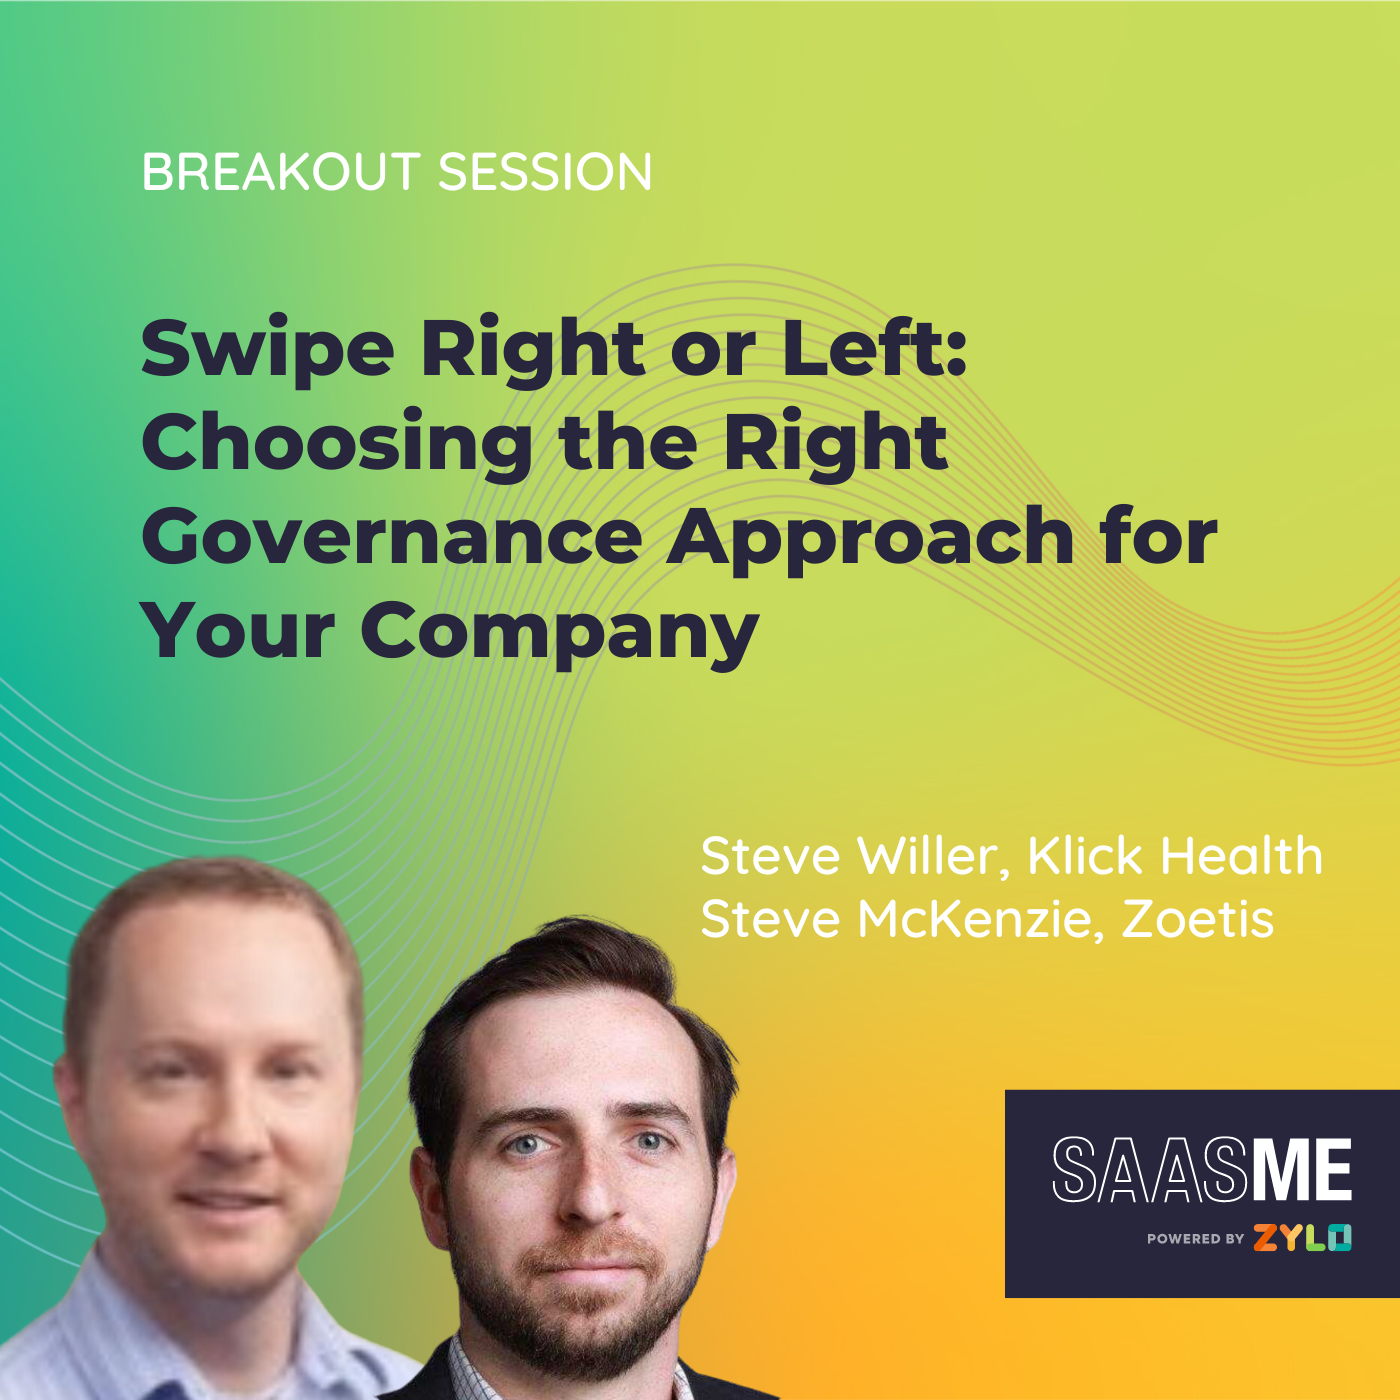 Swipe Right or Left: Choosing the Right Governance Approach for Your Company